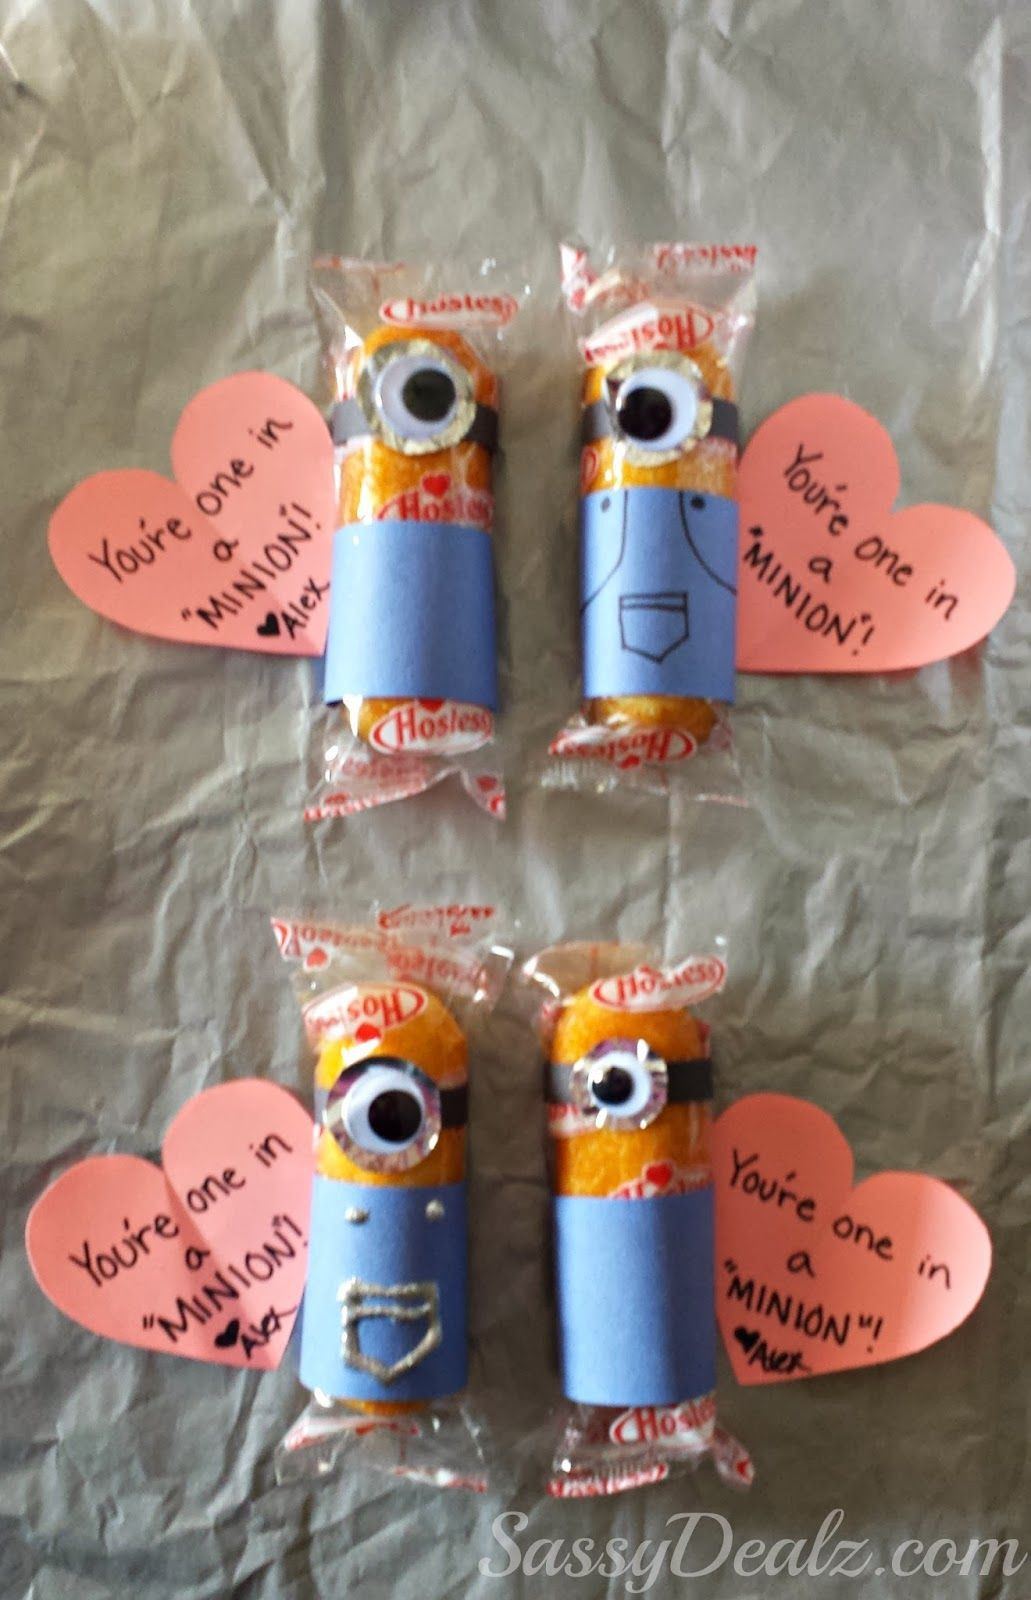 Cute Valentine Gift Ideas For Kids
 Despicable Me "You re e in a Minion" Twinkie Valentines